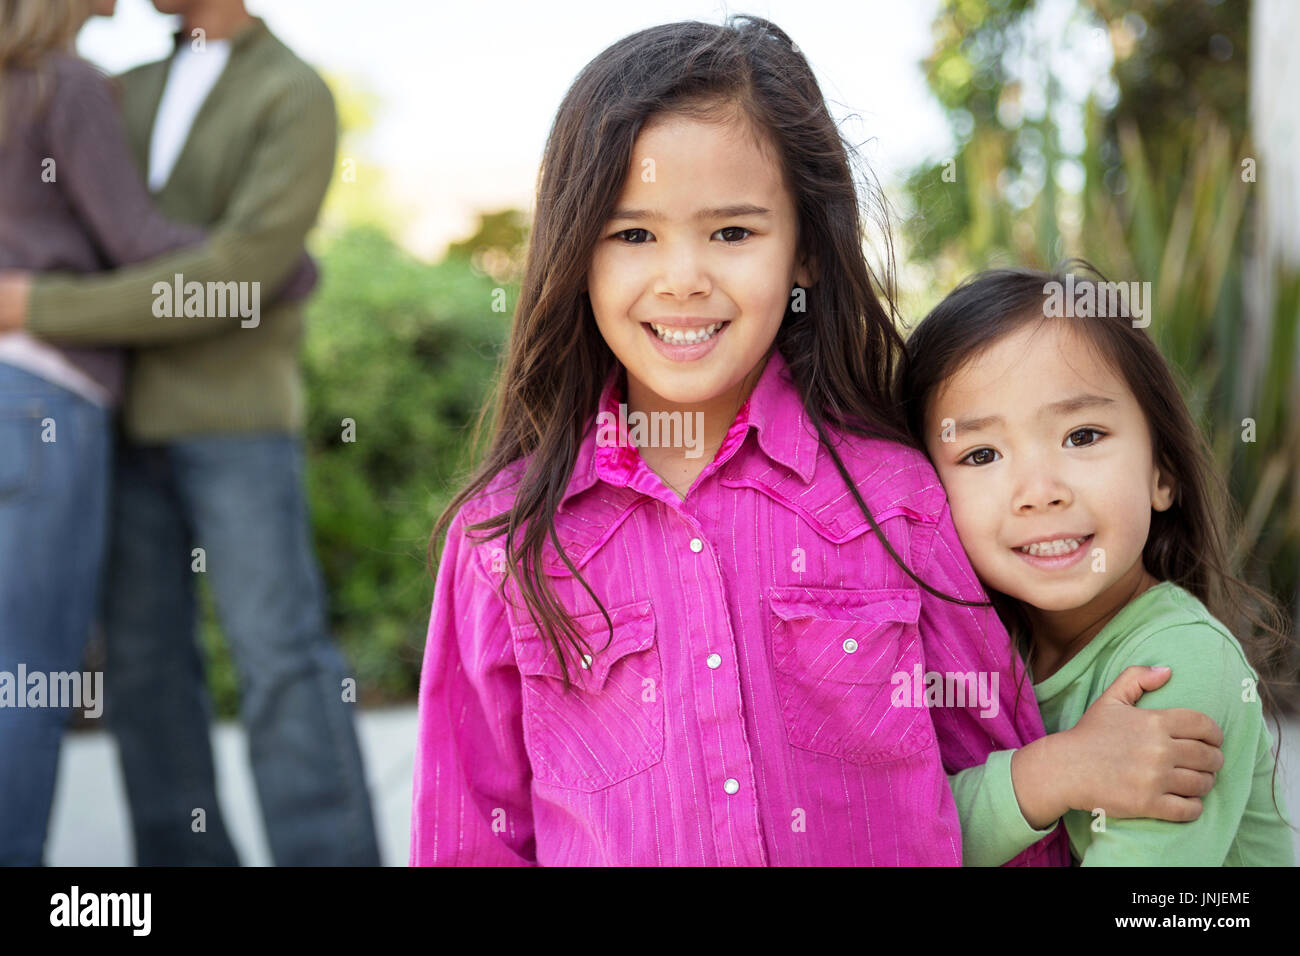 Happy little girls with their parents in the background. Stock Photo